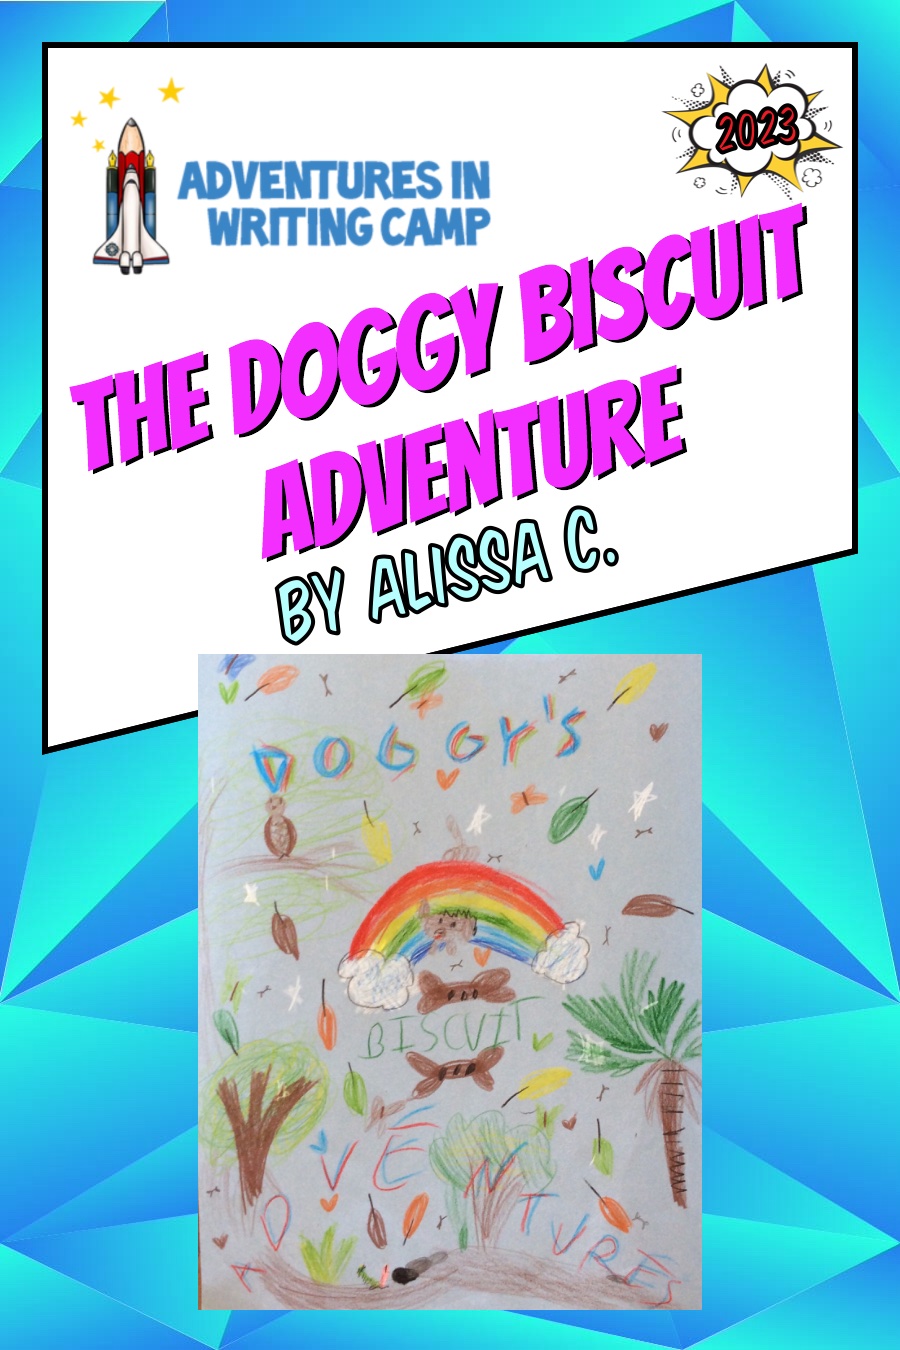 The Doggy Biscuit Adventure by Alissa C